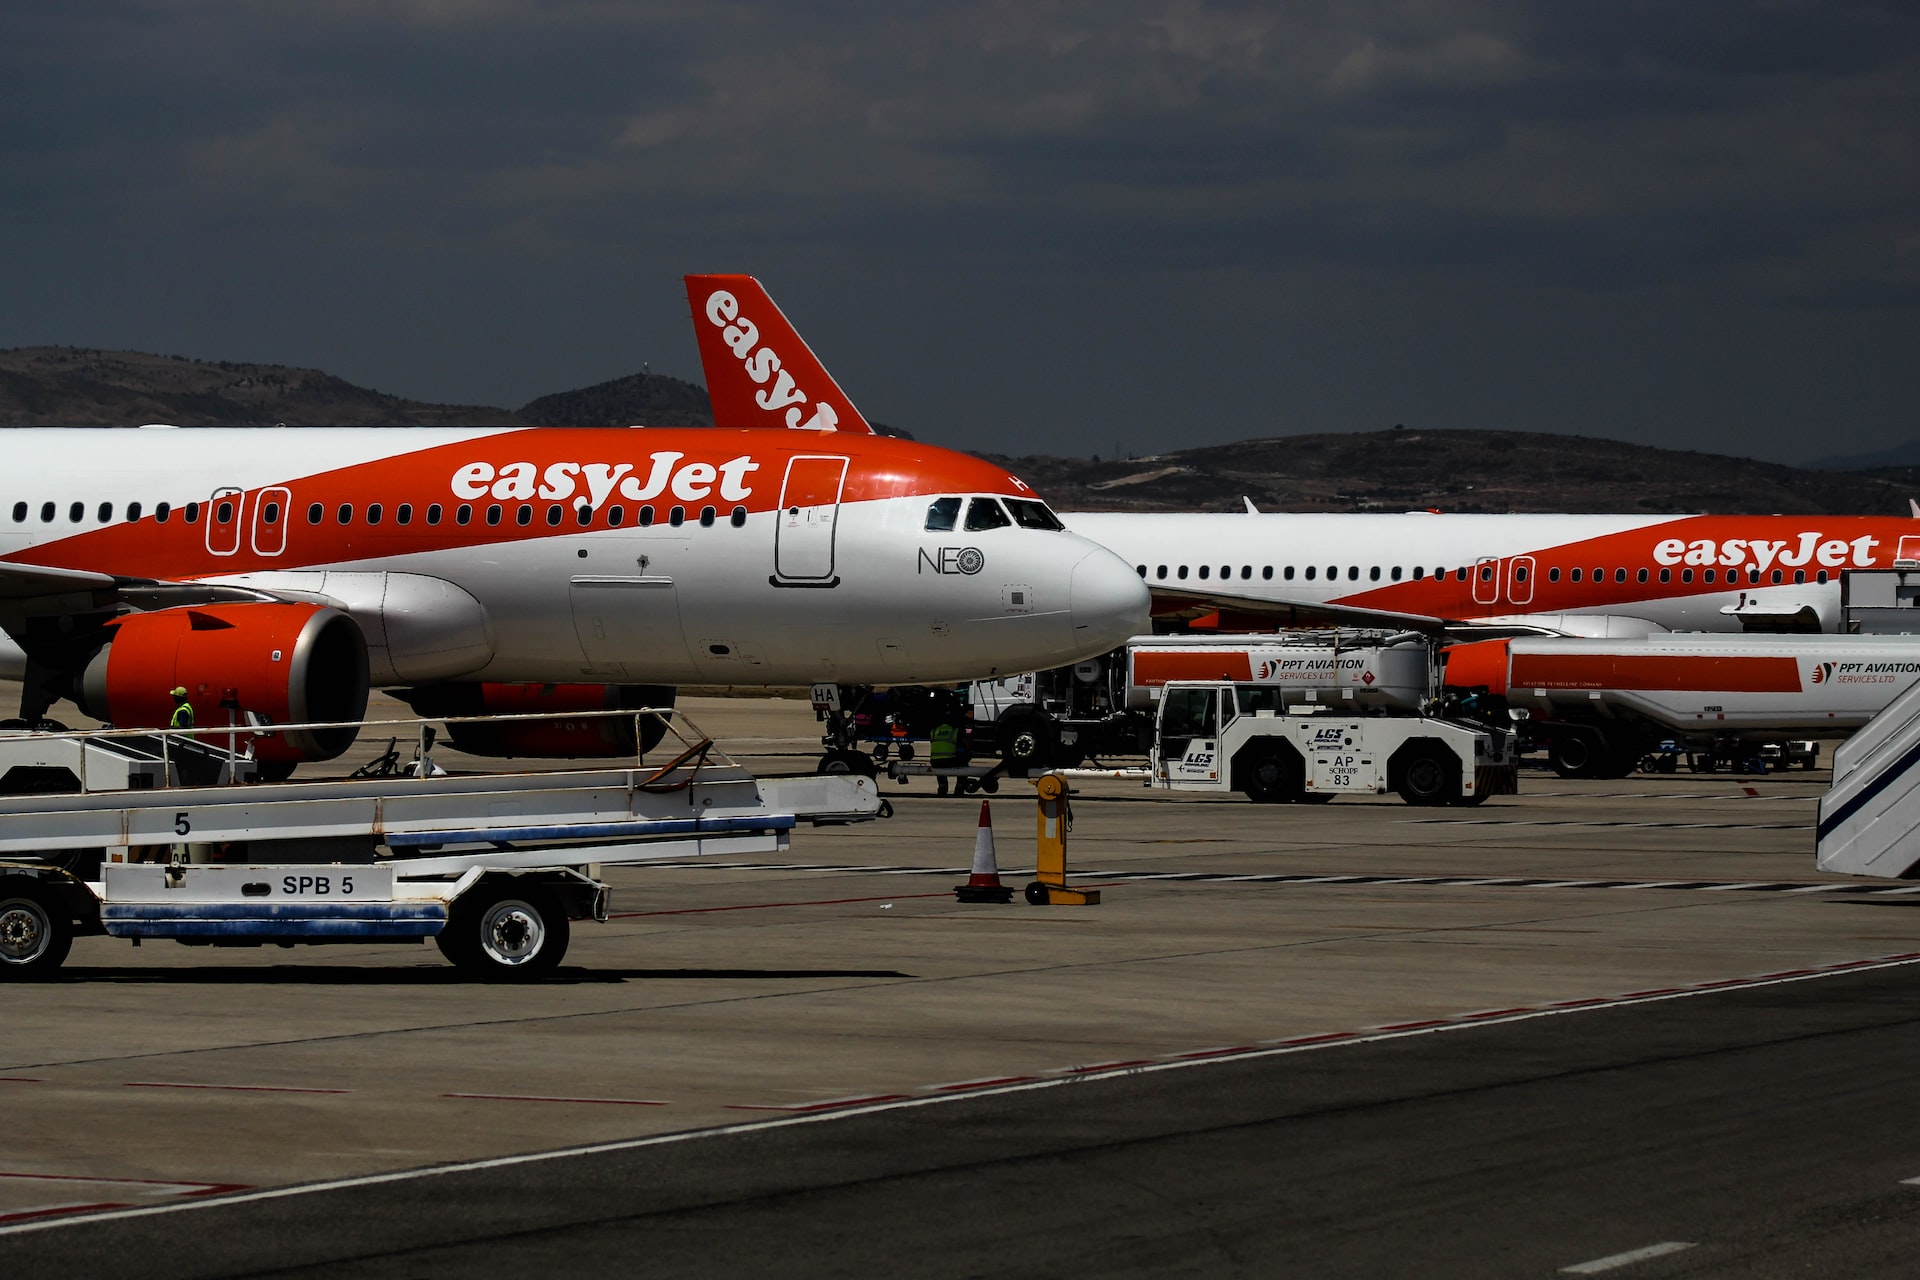 easyJet aircraft stationed at an airport.